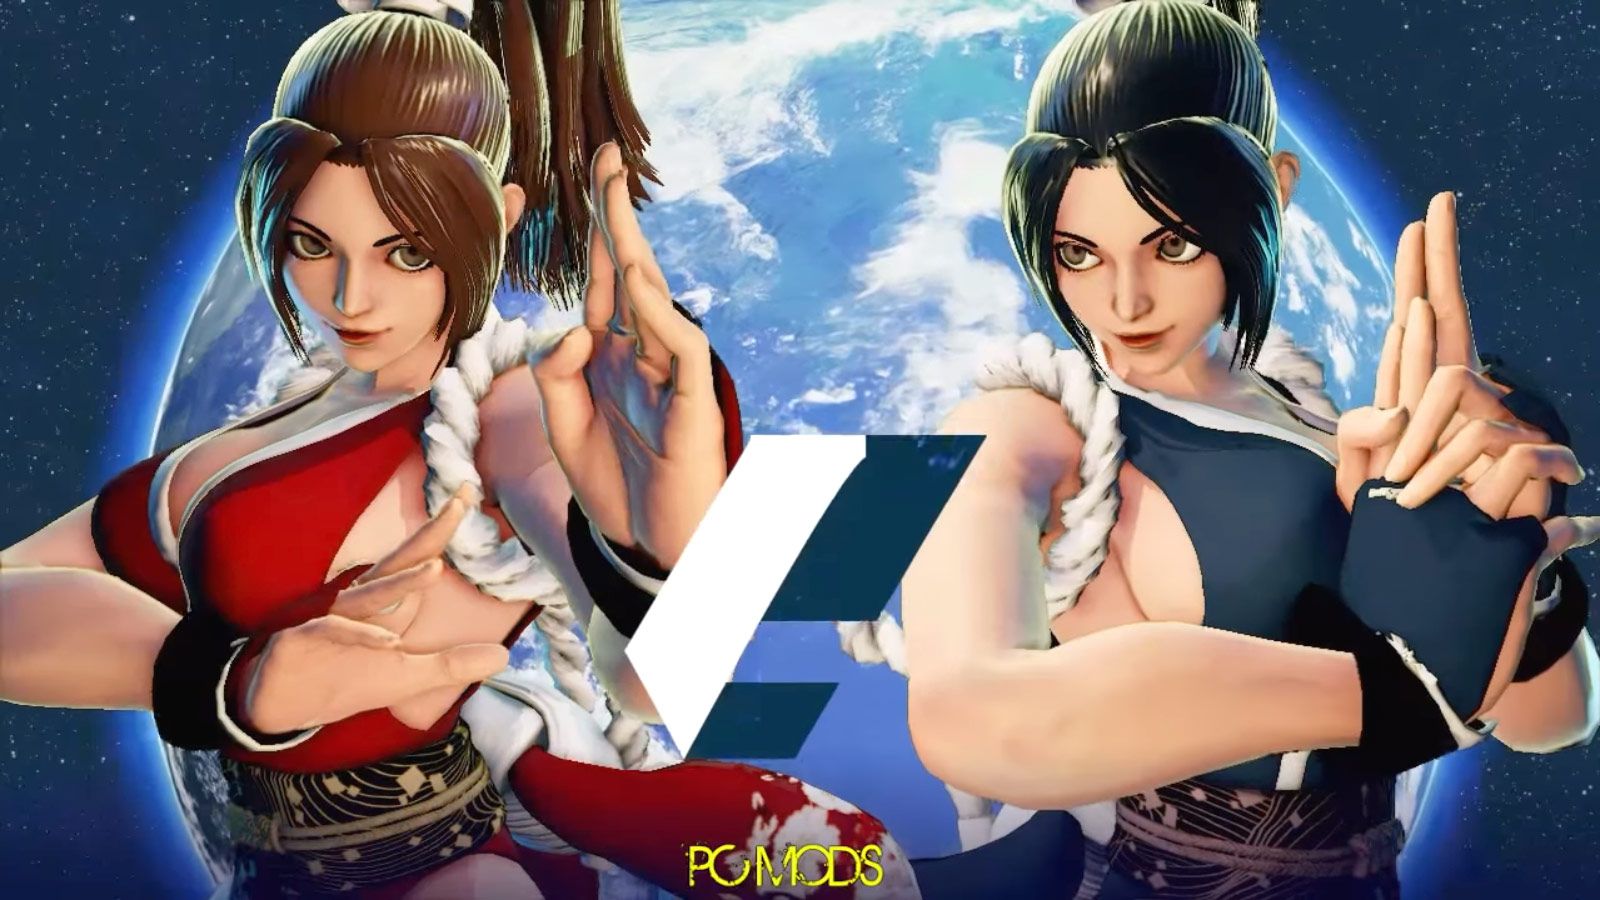 Mai Shiranui, Cody Travers, and Doomsday mods 3 out of 9 image gallery